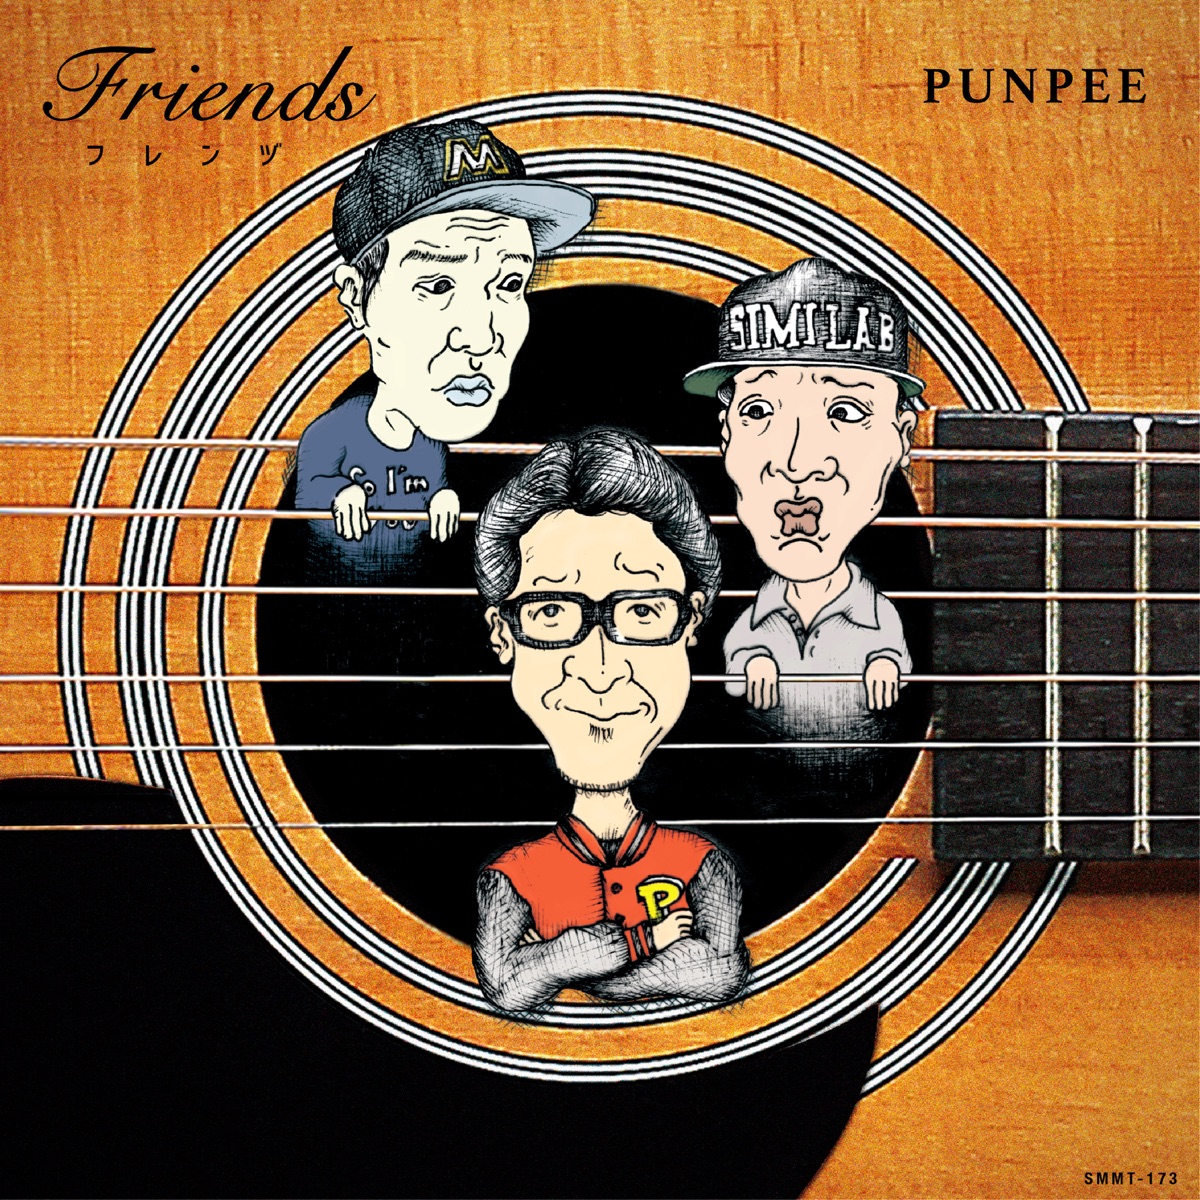 Cover art for『PUNPEE - Friends』from the release『Friends』